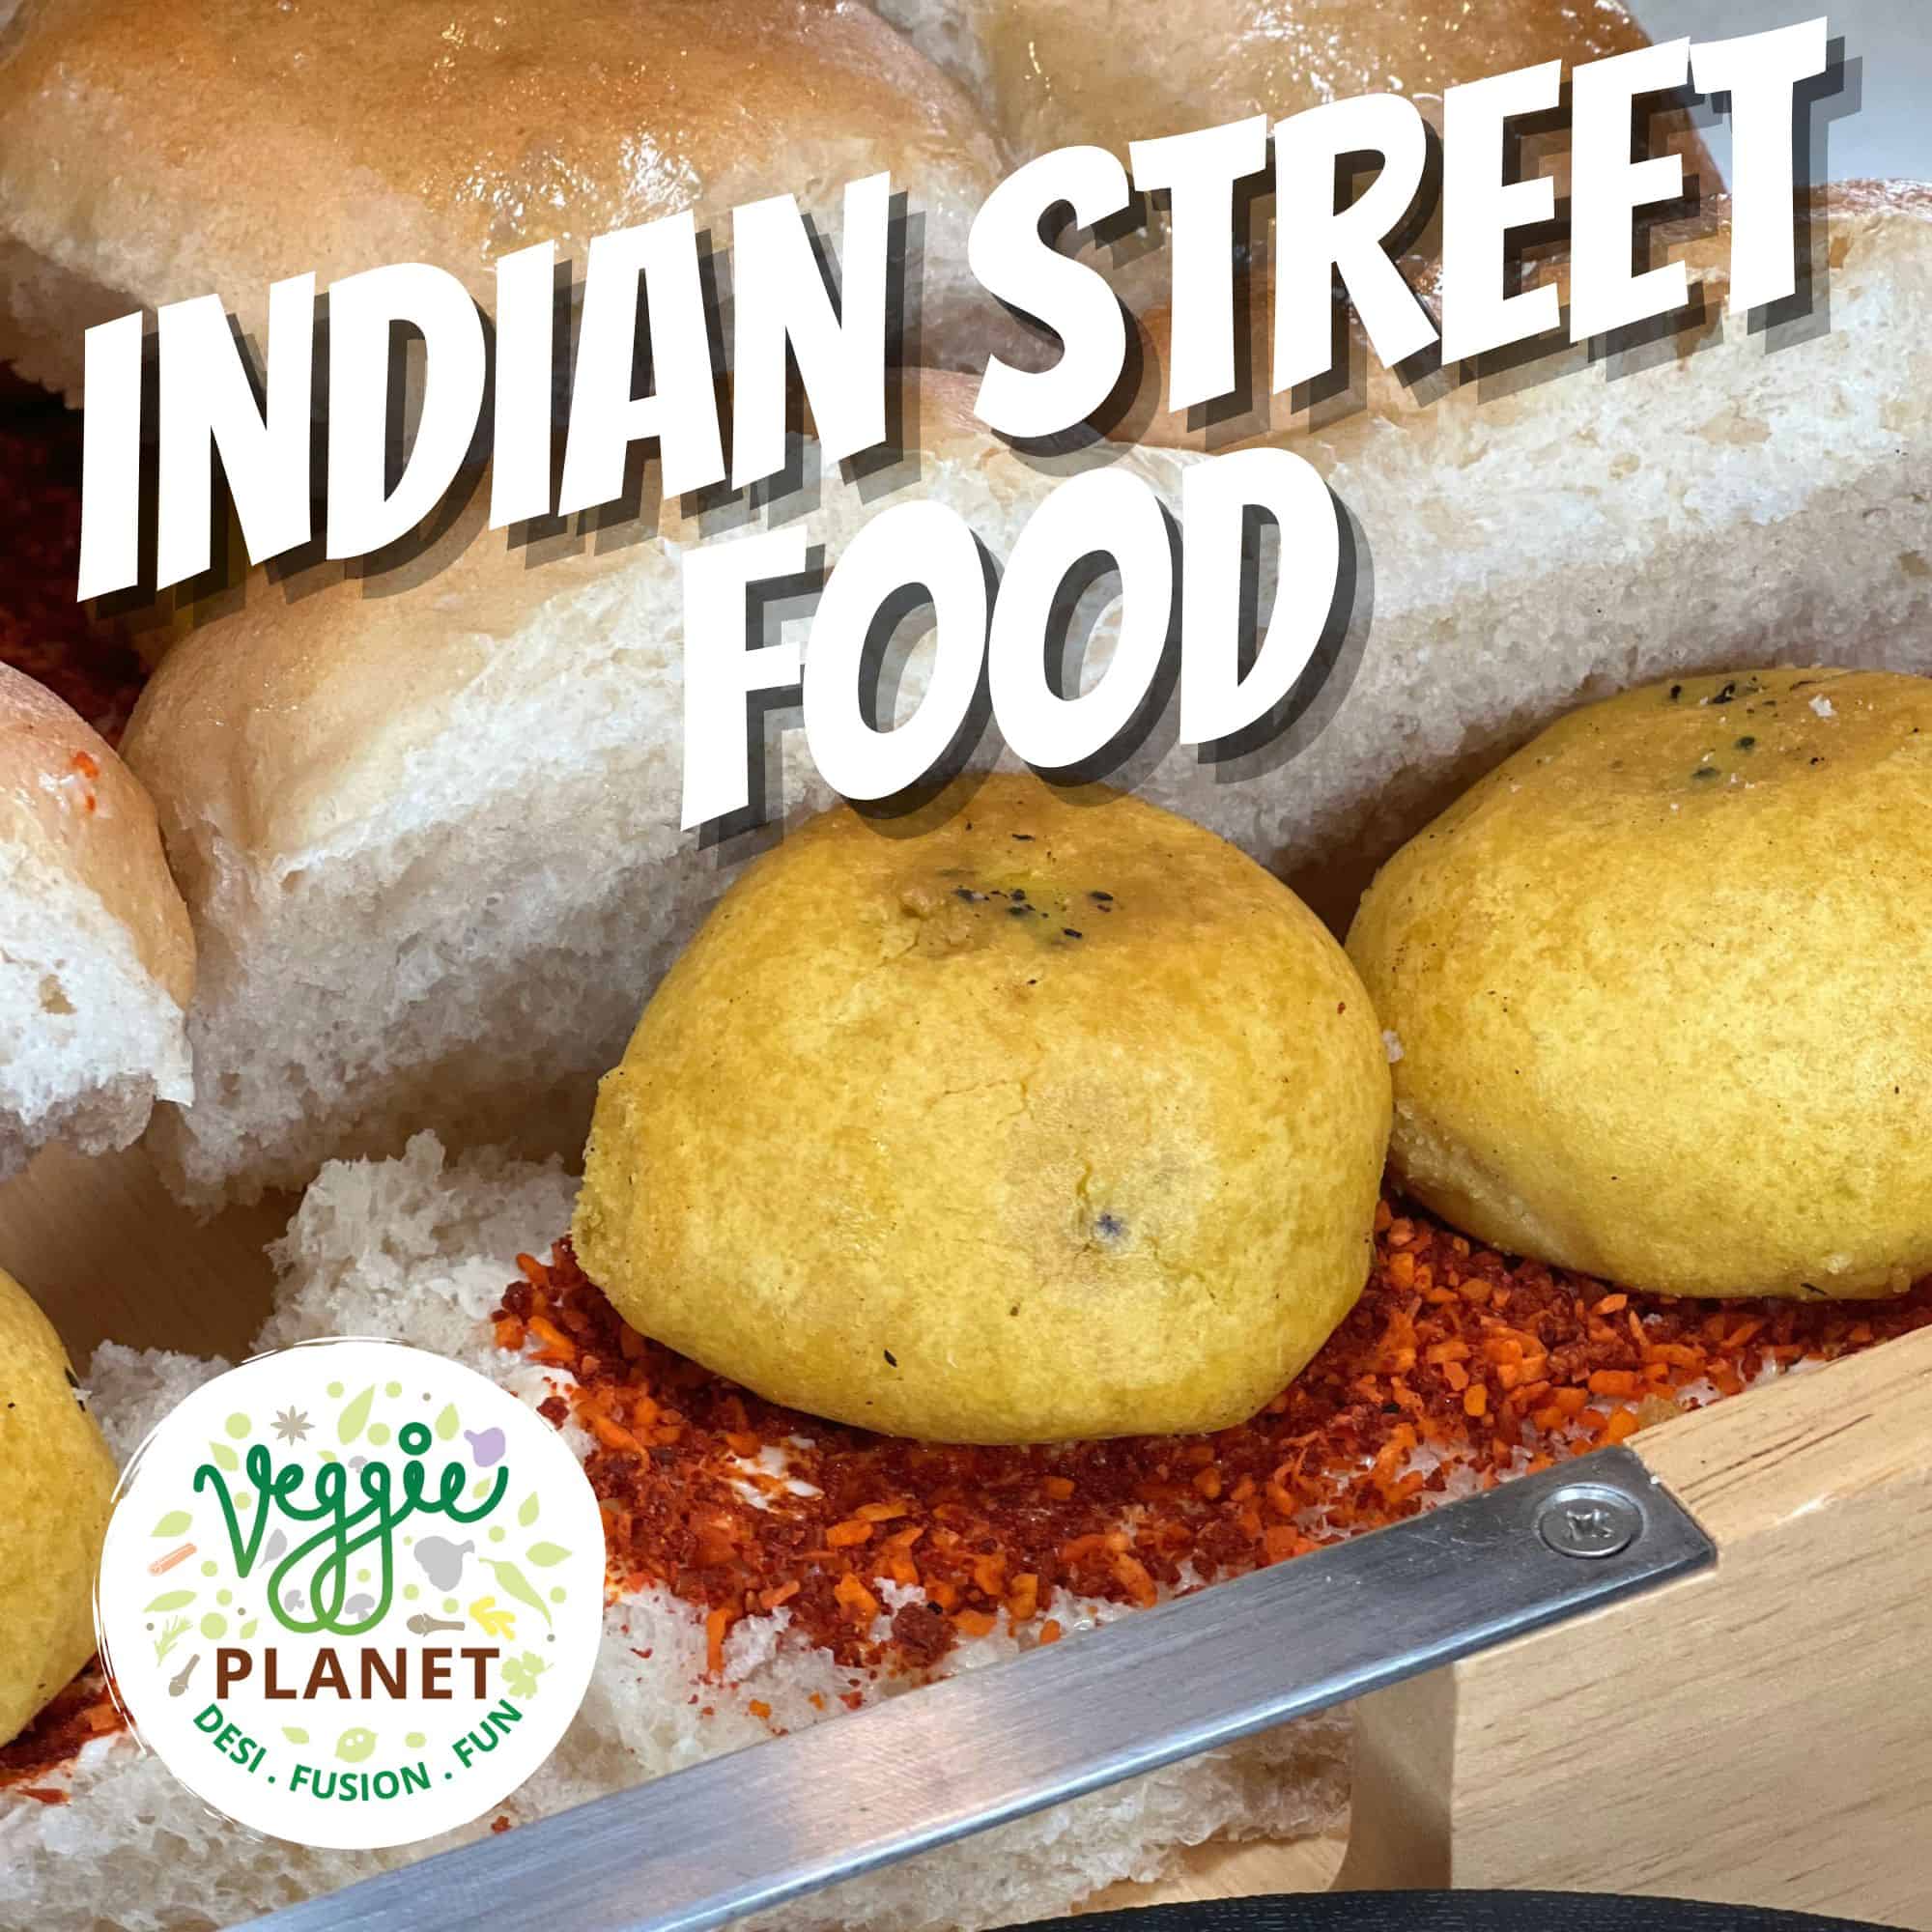 Why Indian Street Food Is The Best?